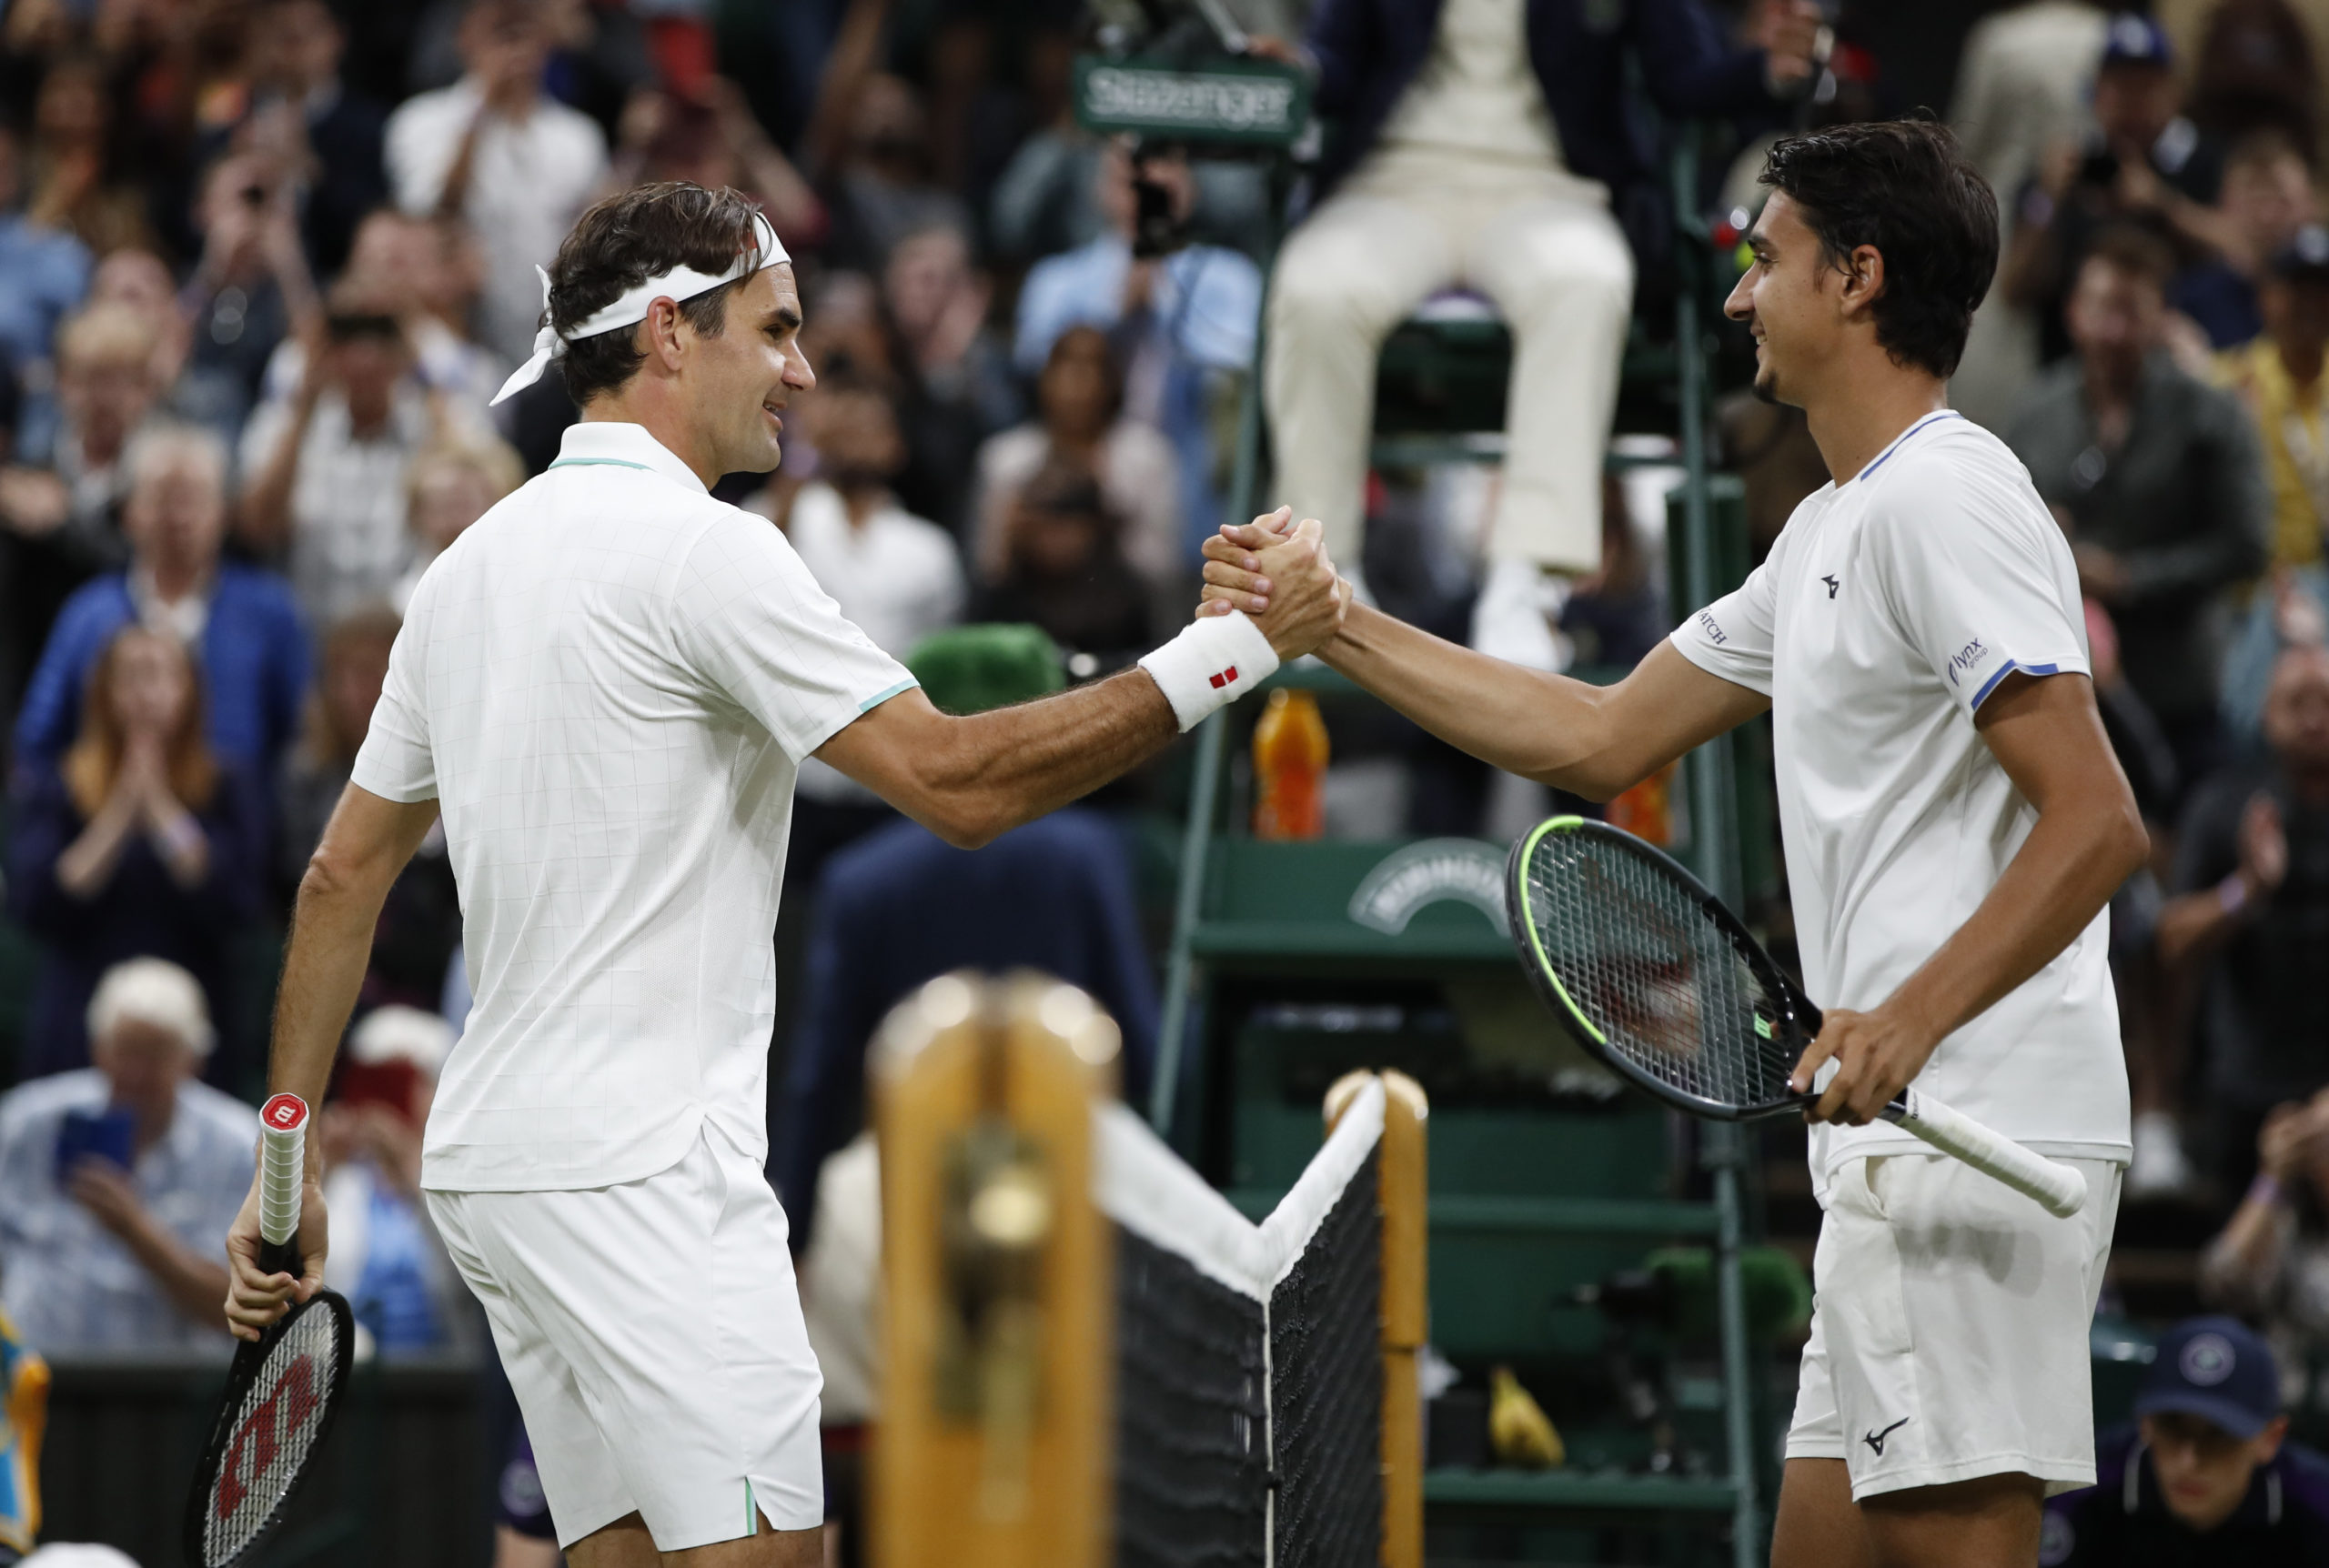 Switzerland's Roger Federer shakes hands with  Italy's Lorenzo Sonego after winning their fourth round match